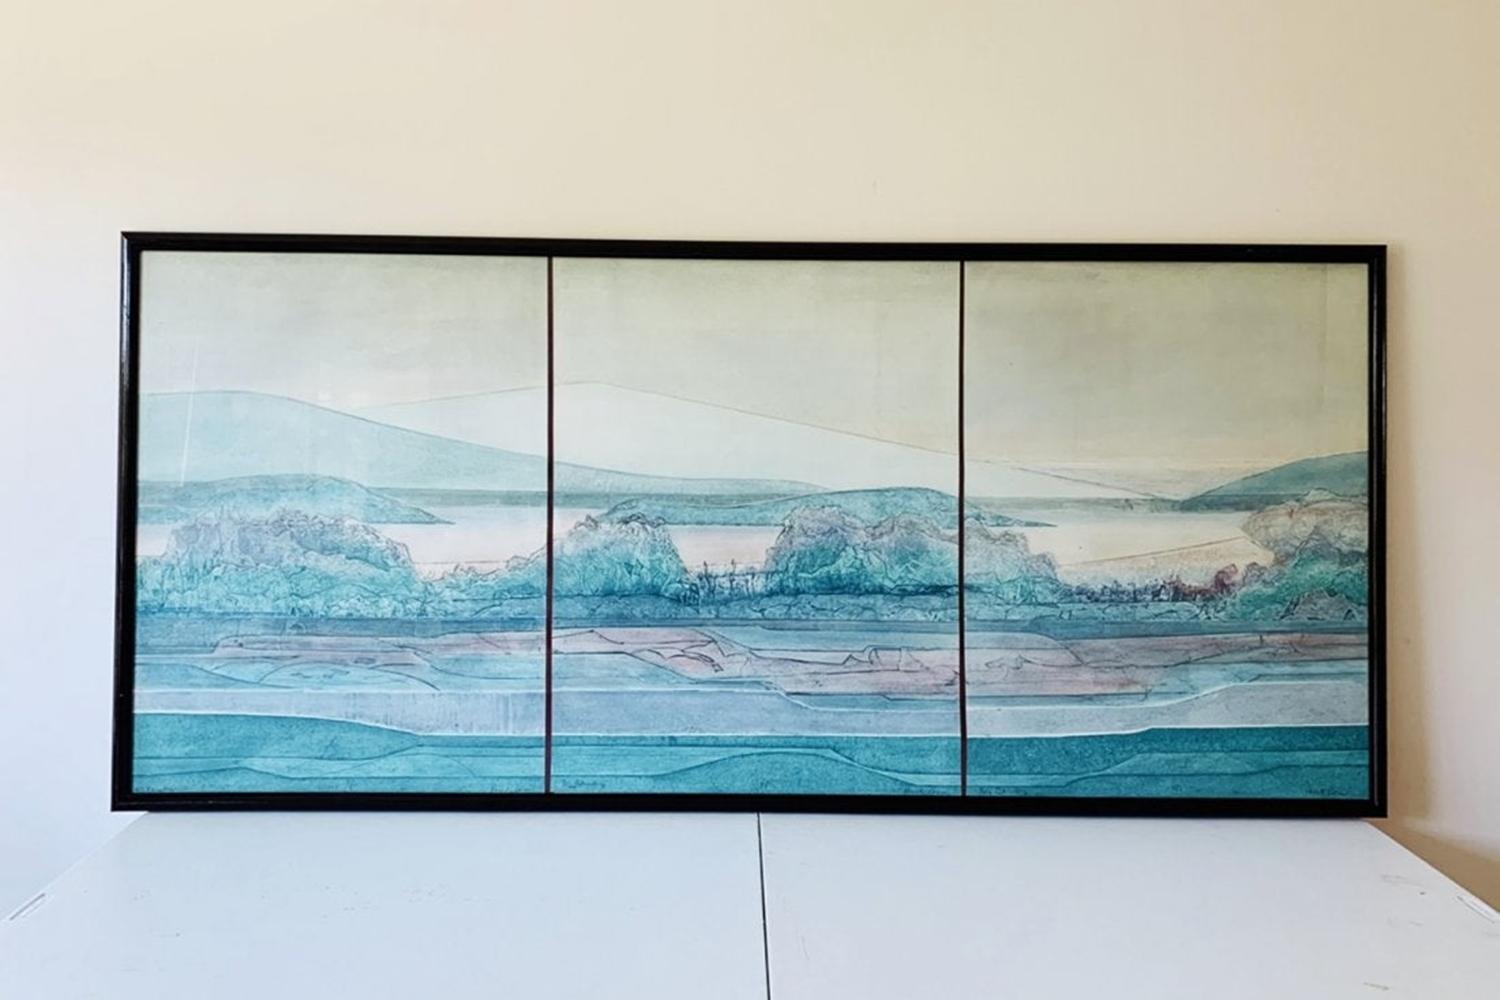 Big Country, etching on zinc triptych by German artist Renata Zerner.

This is the Artist Proof, and is signed by the artist.

Measurements:
34 inches high x 75 inches wide.

Hand signed: Lower right on each panel
Condition: